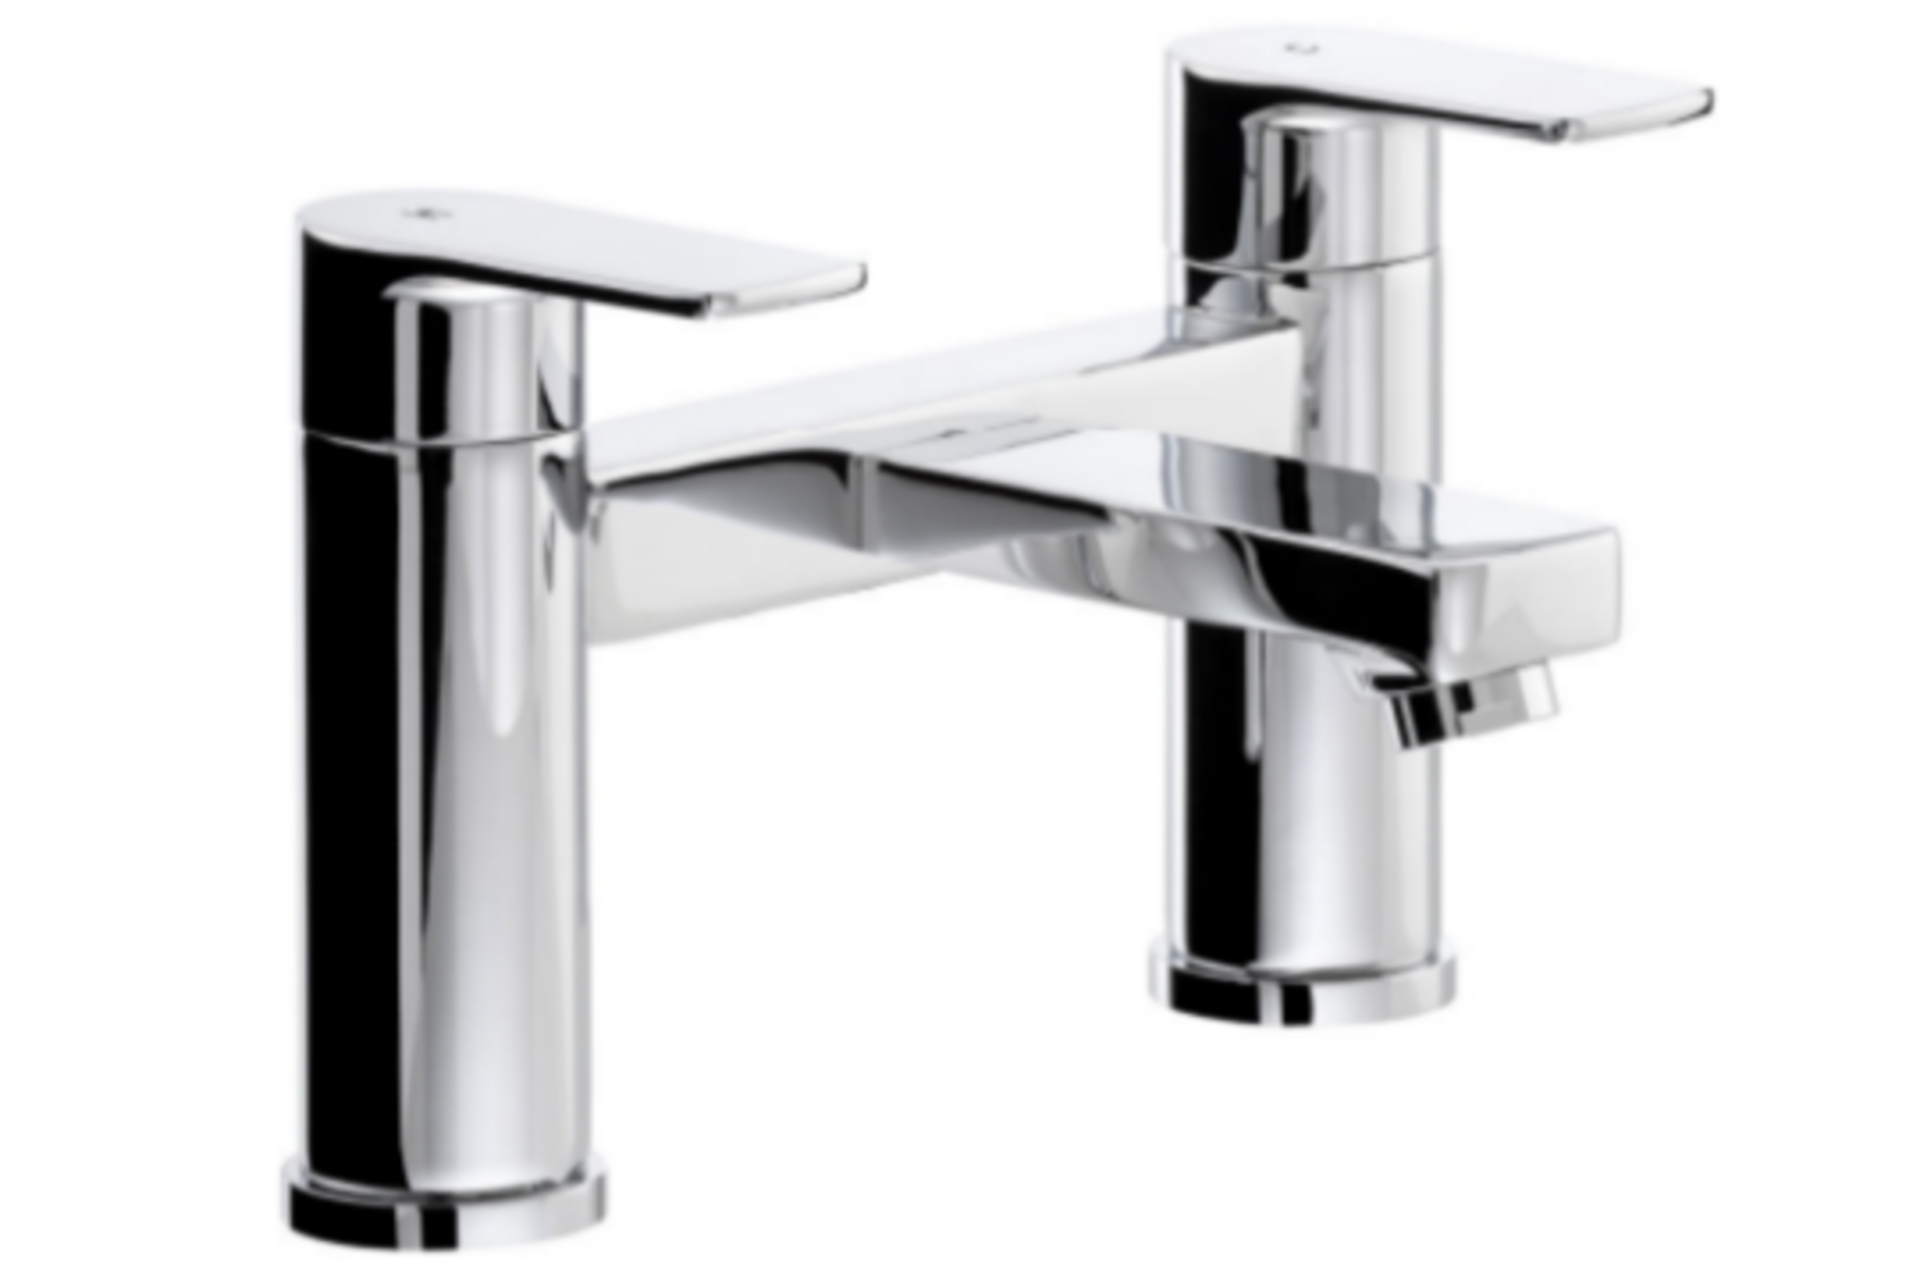 2 x NEW BOXED Abode Lamona CONTEMPORARY CHROME BATH TAPS. RRP £129.99 EACH, GIVING THIS LOT A